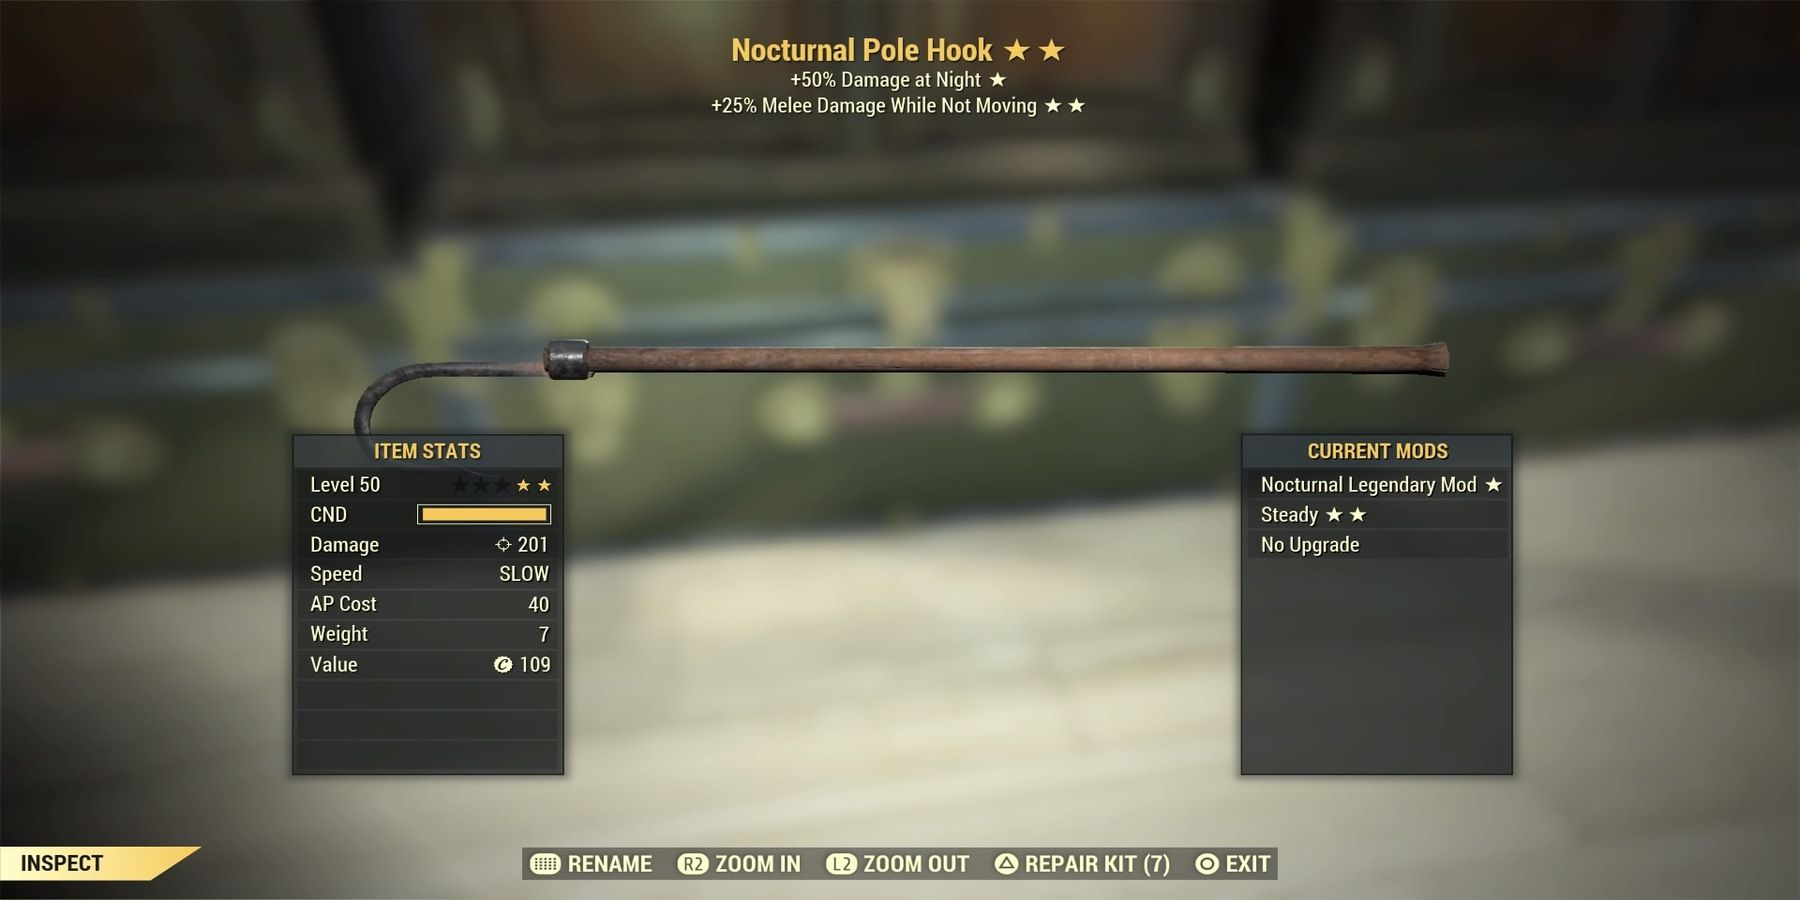 Nocturnal Pole Hook in Fallout 76